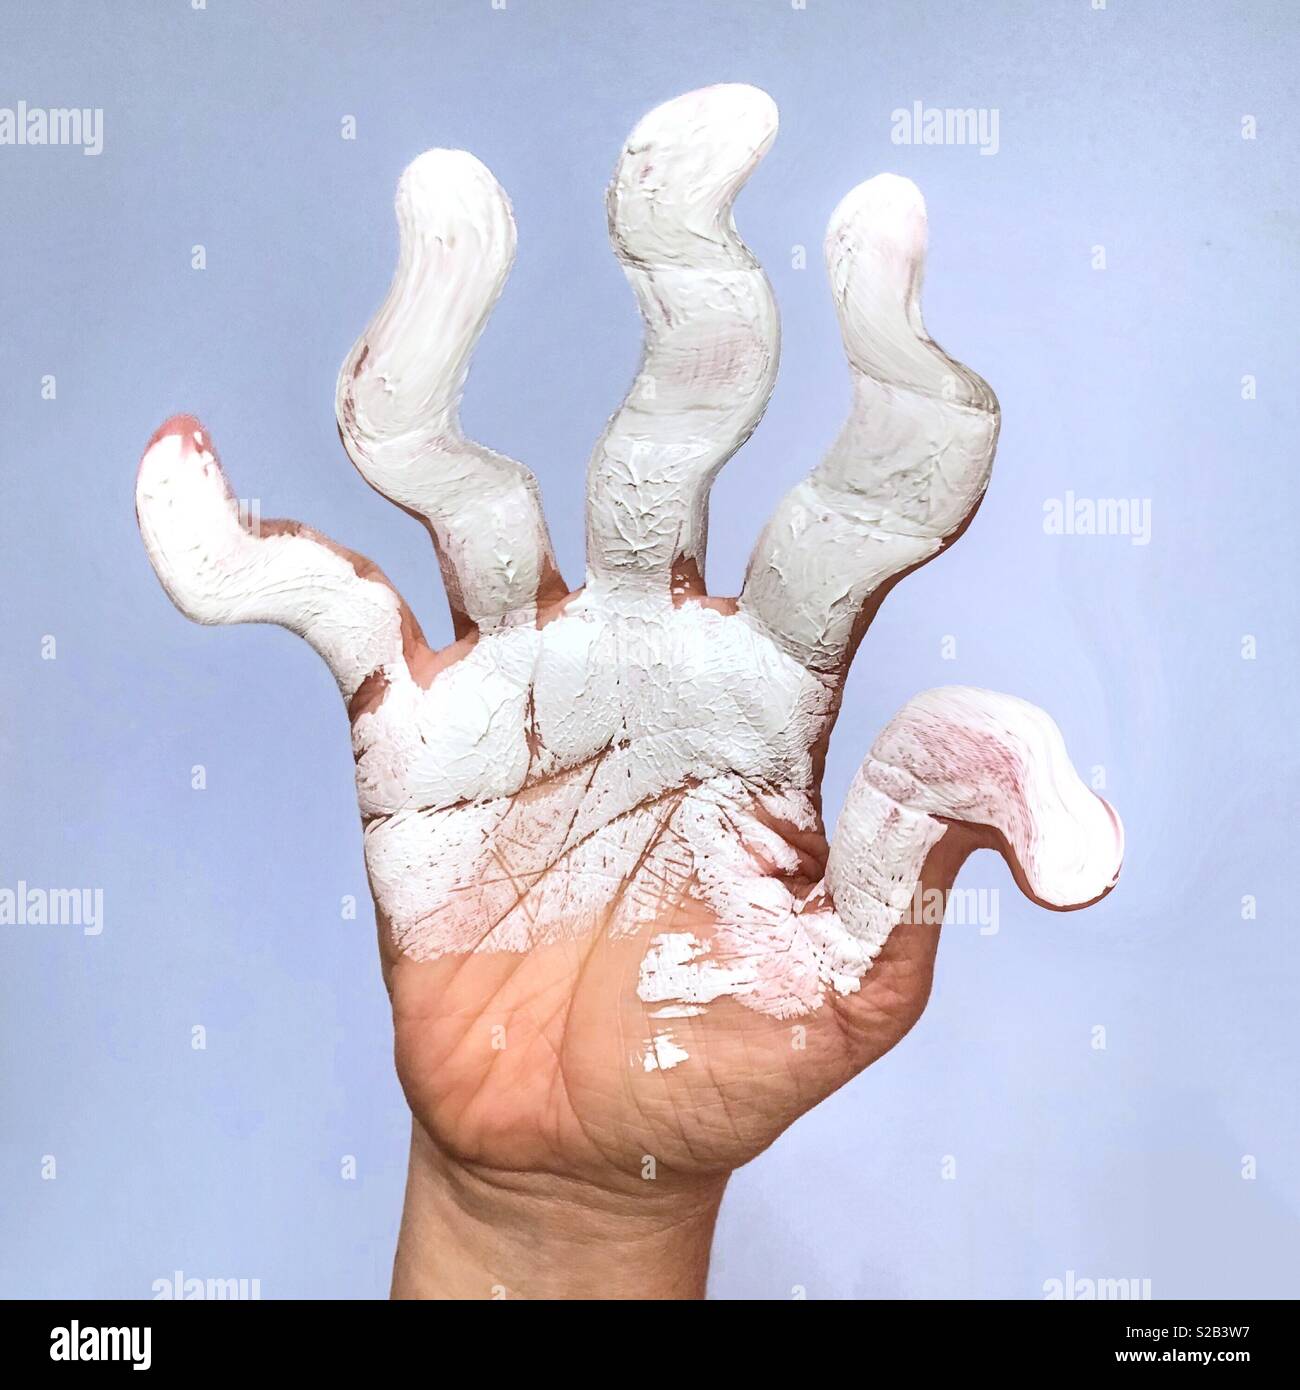 A digital manipulation of a hand covered in white paint with distorted, twisted fingers Stock Photo